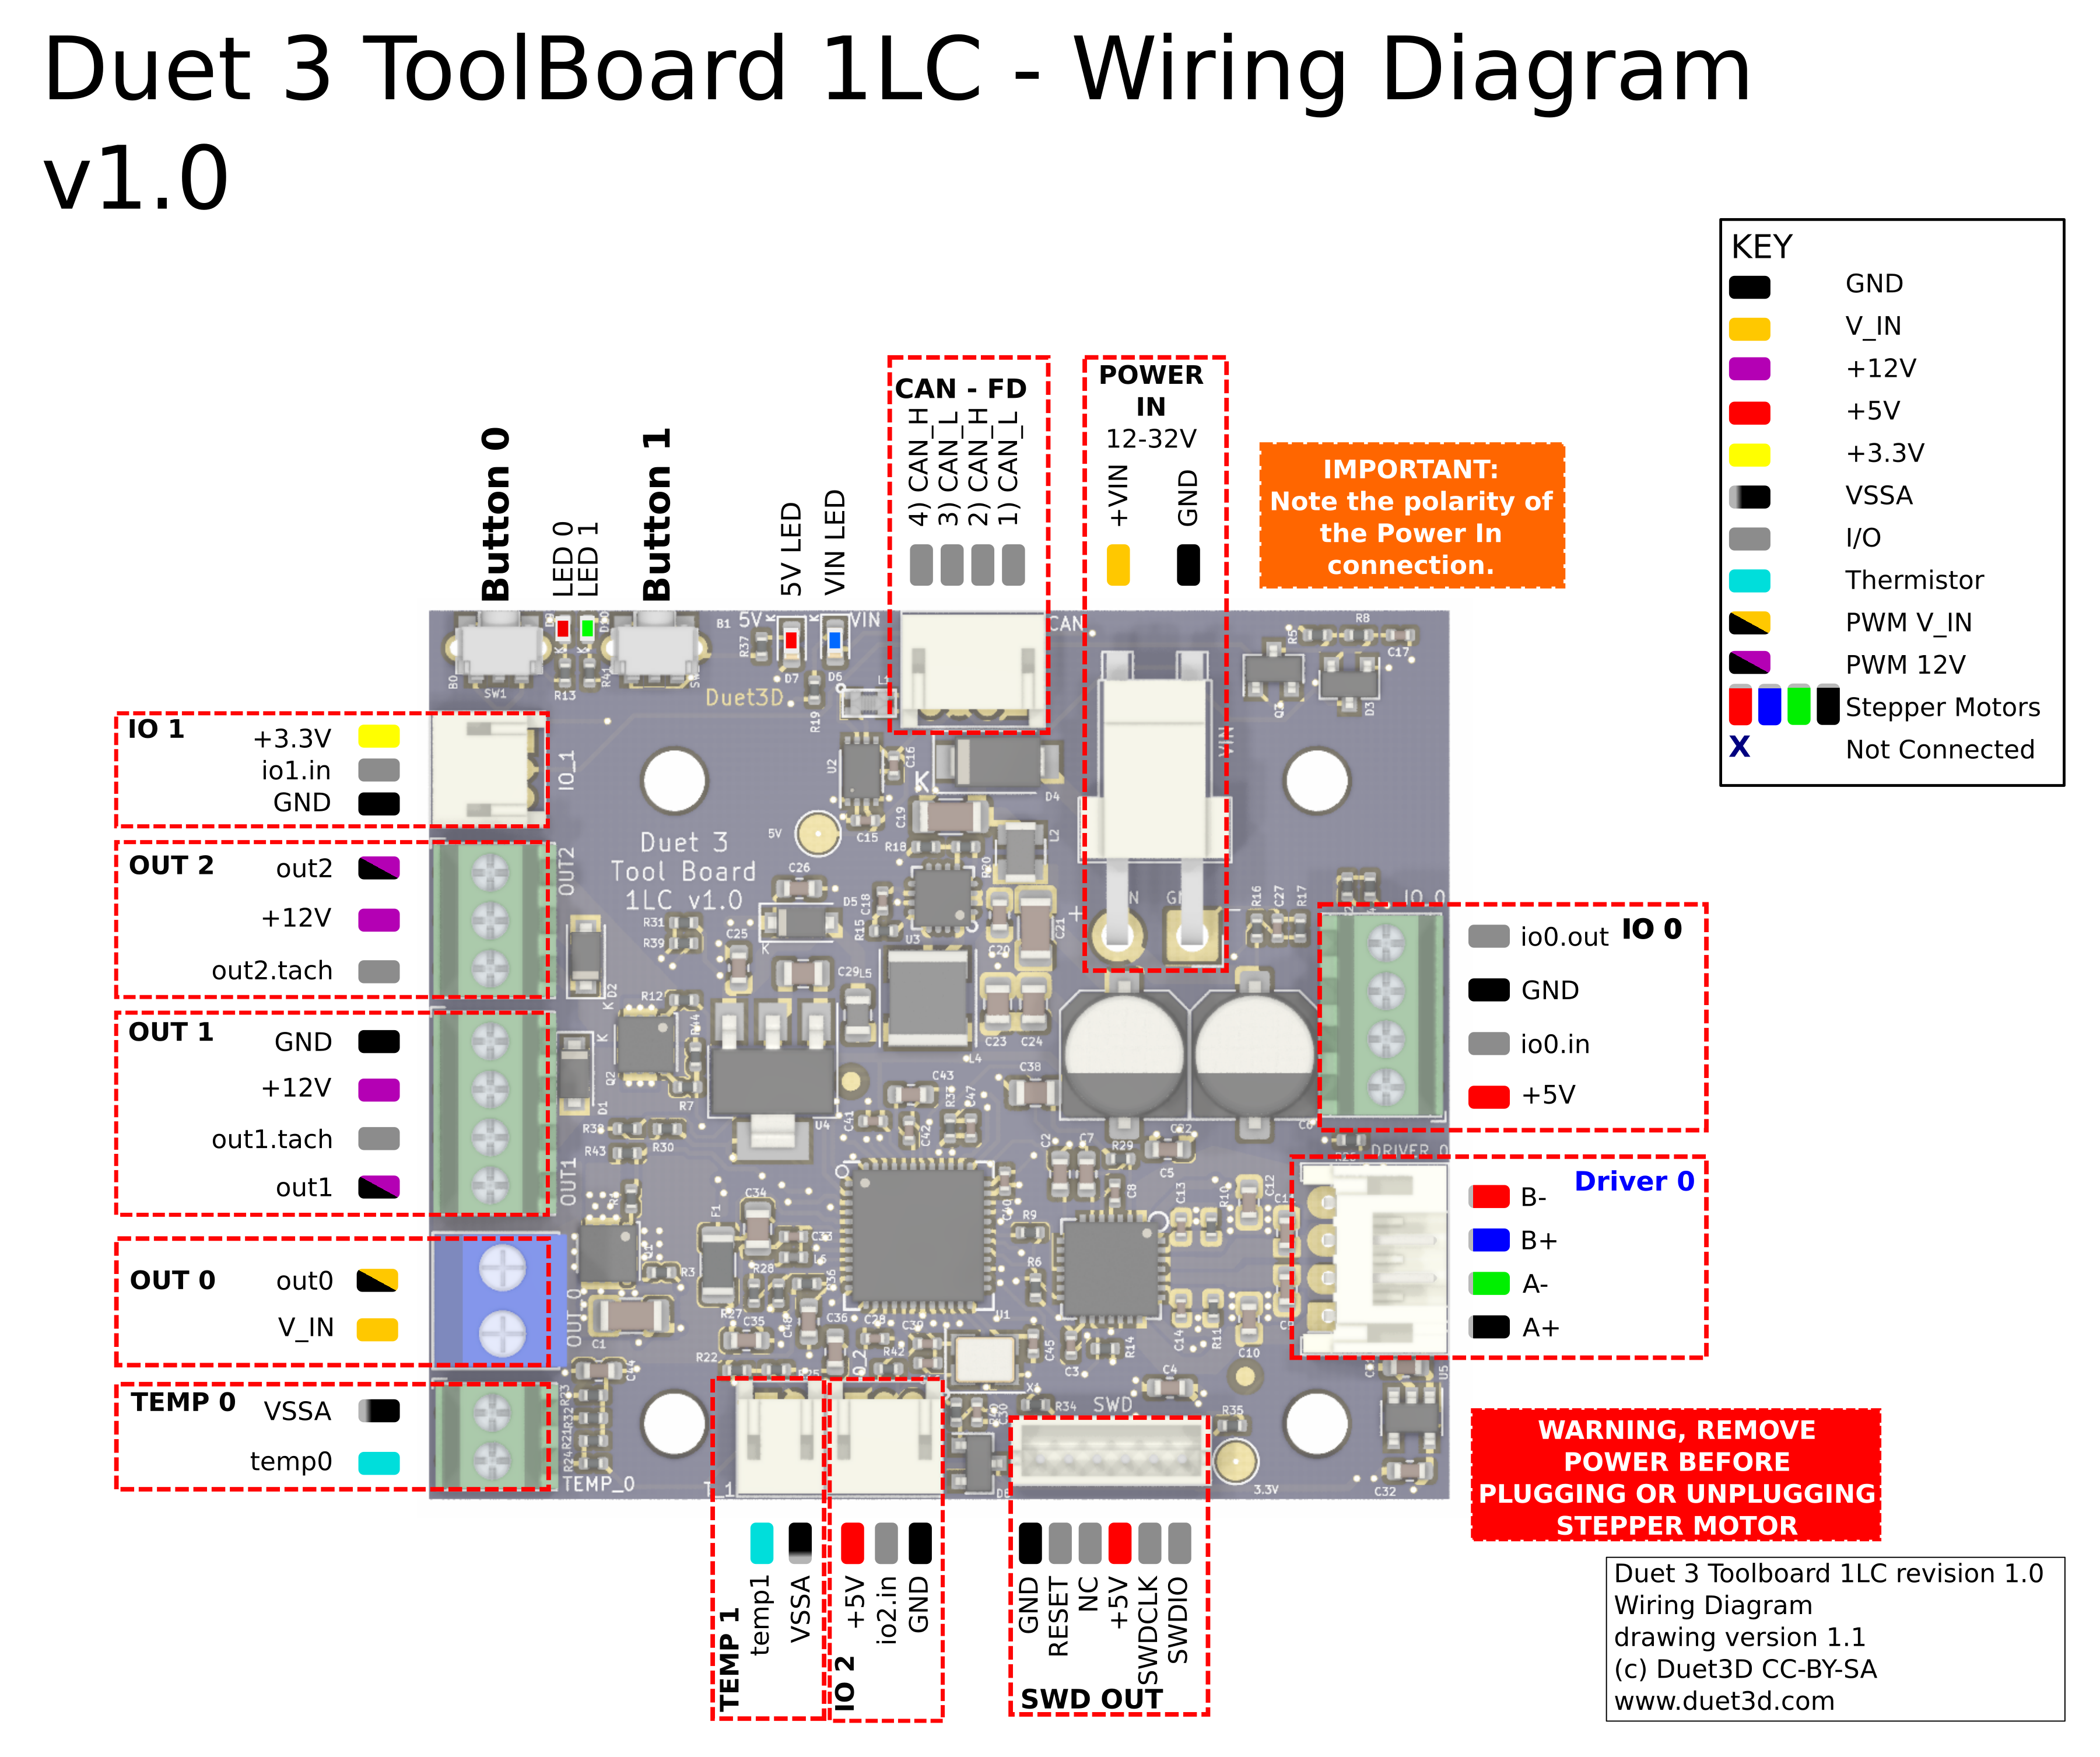 diagram showing the pinout for each of the headers on the Duet 3 toolboard 1LC v1.0